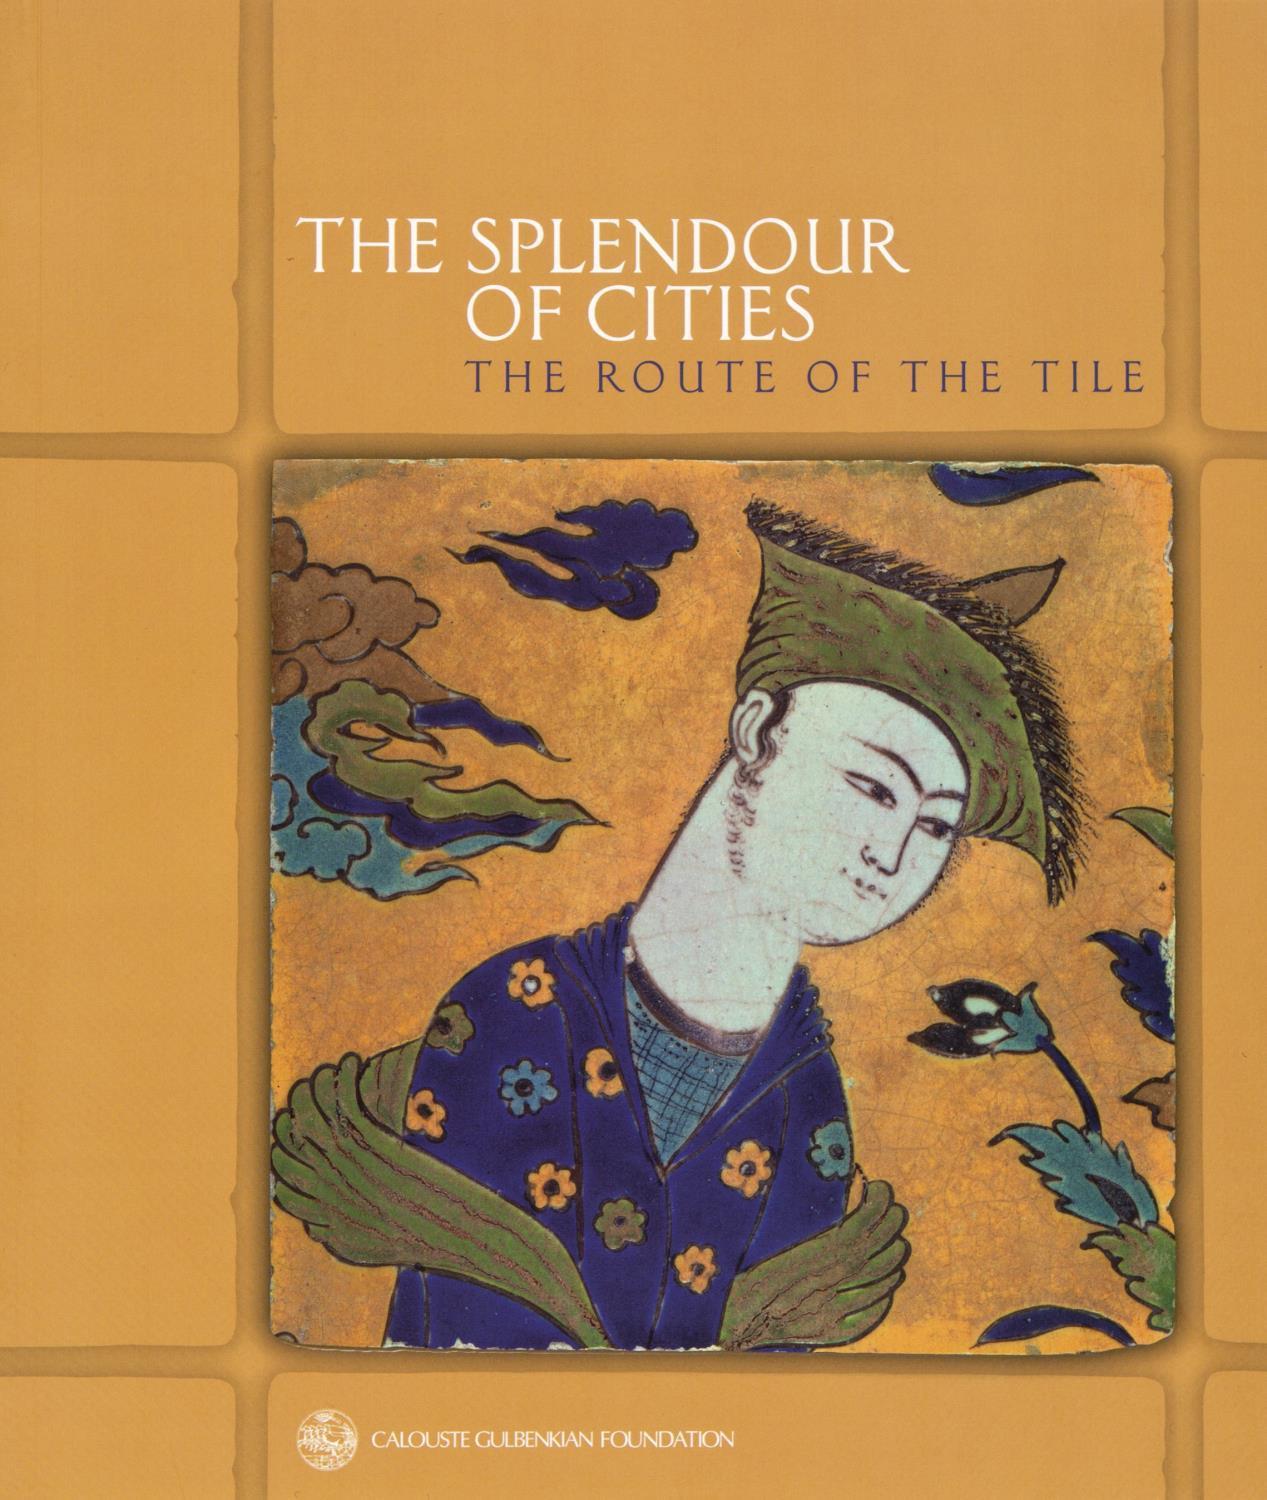 The Splendour of Cities. The Route of the Tile